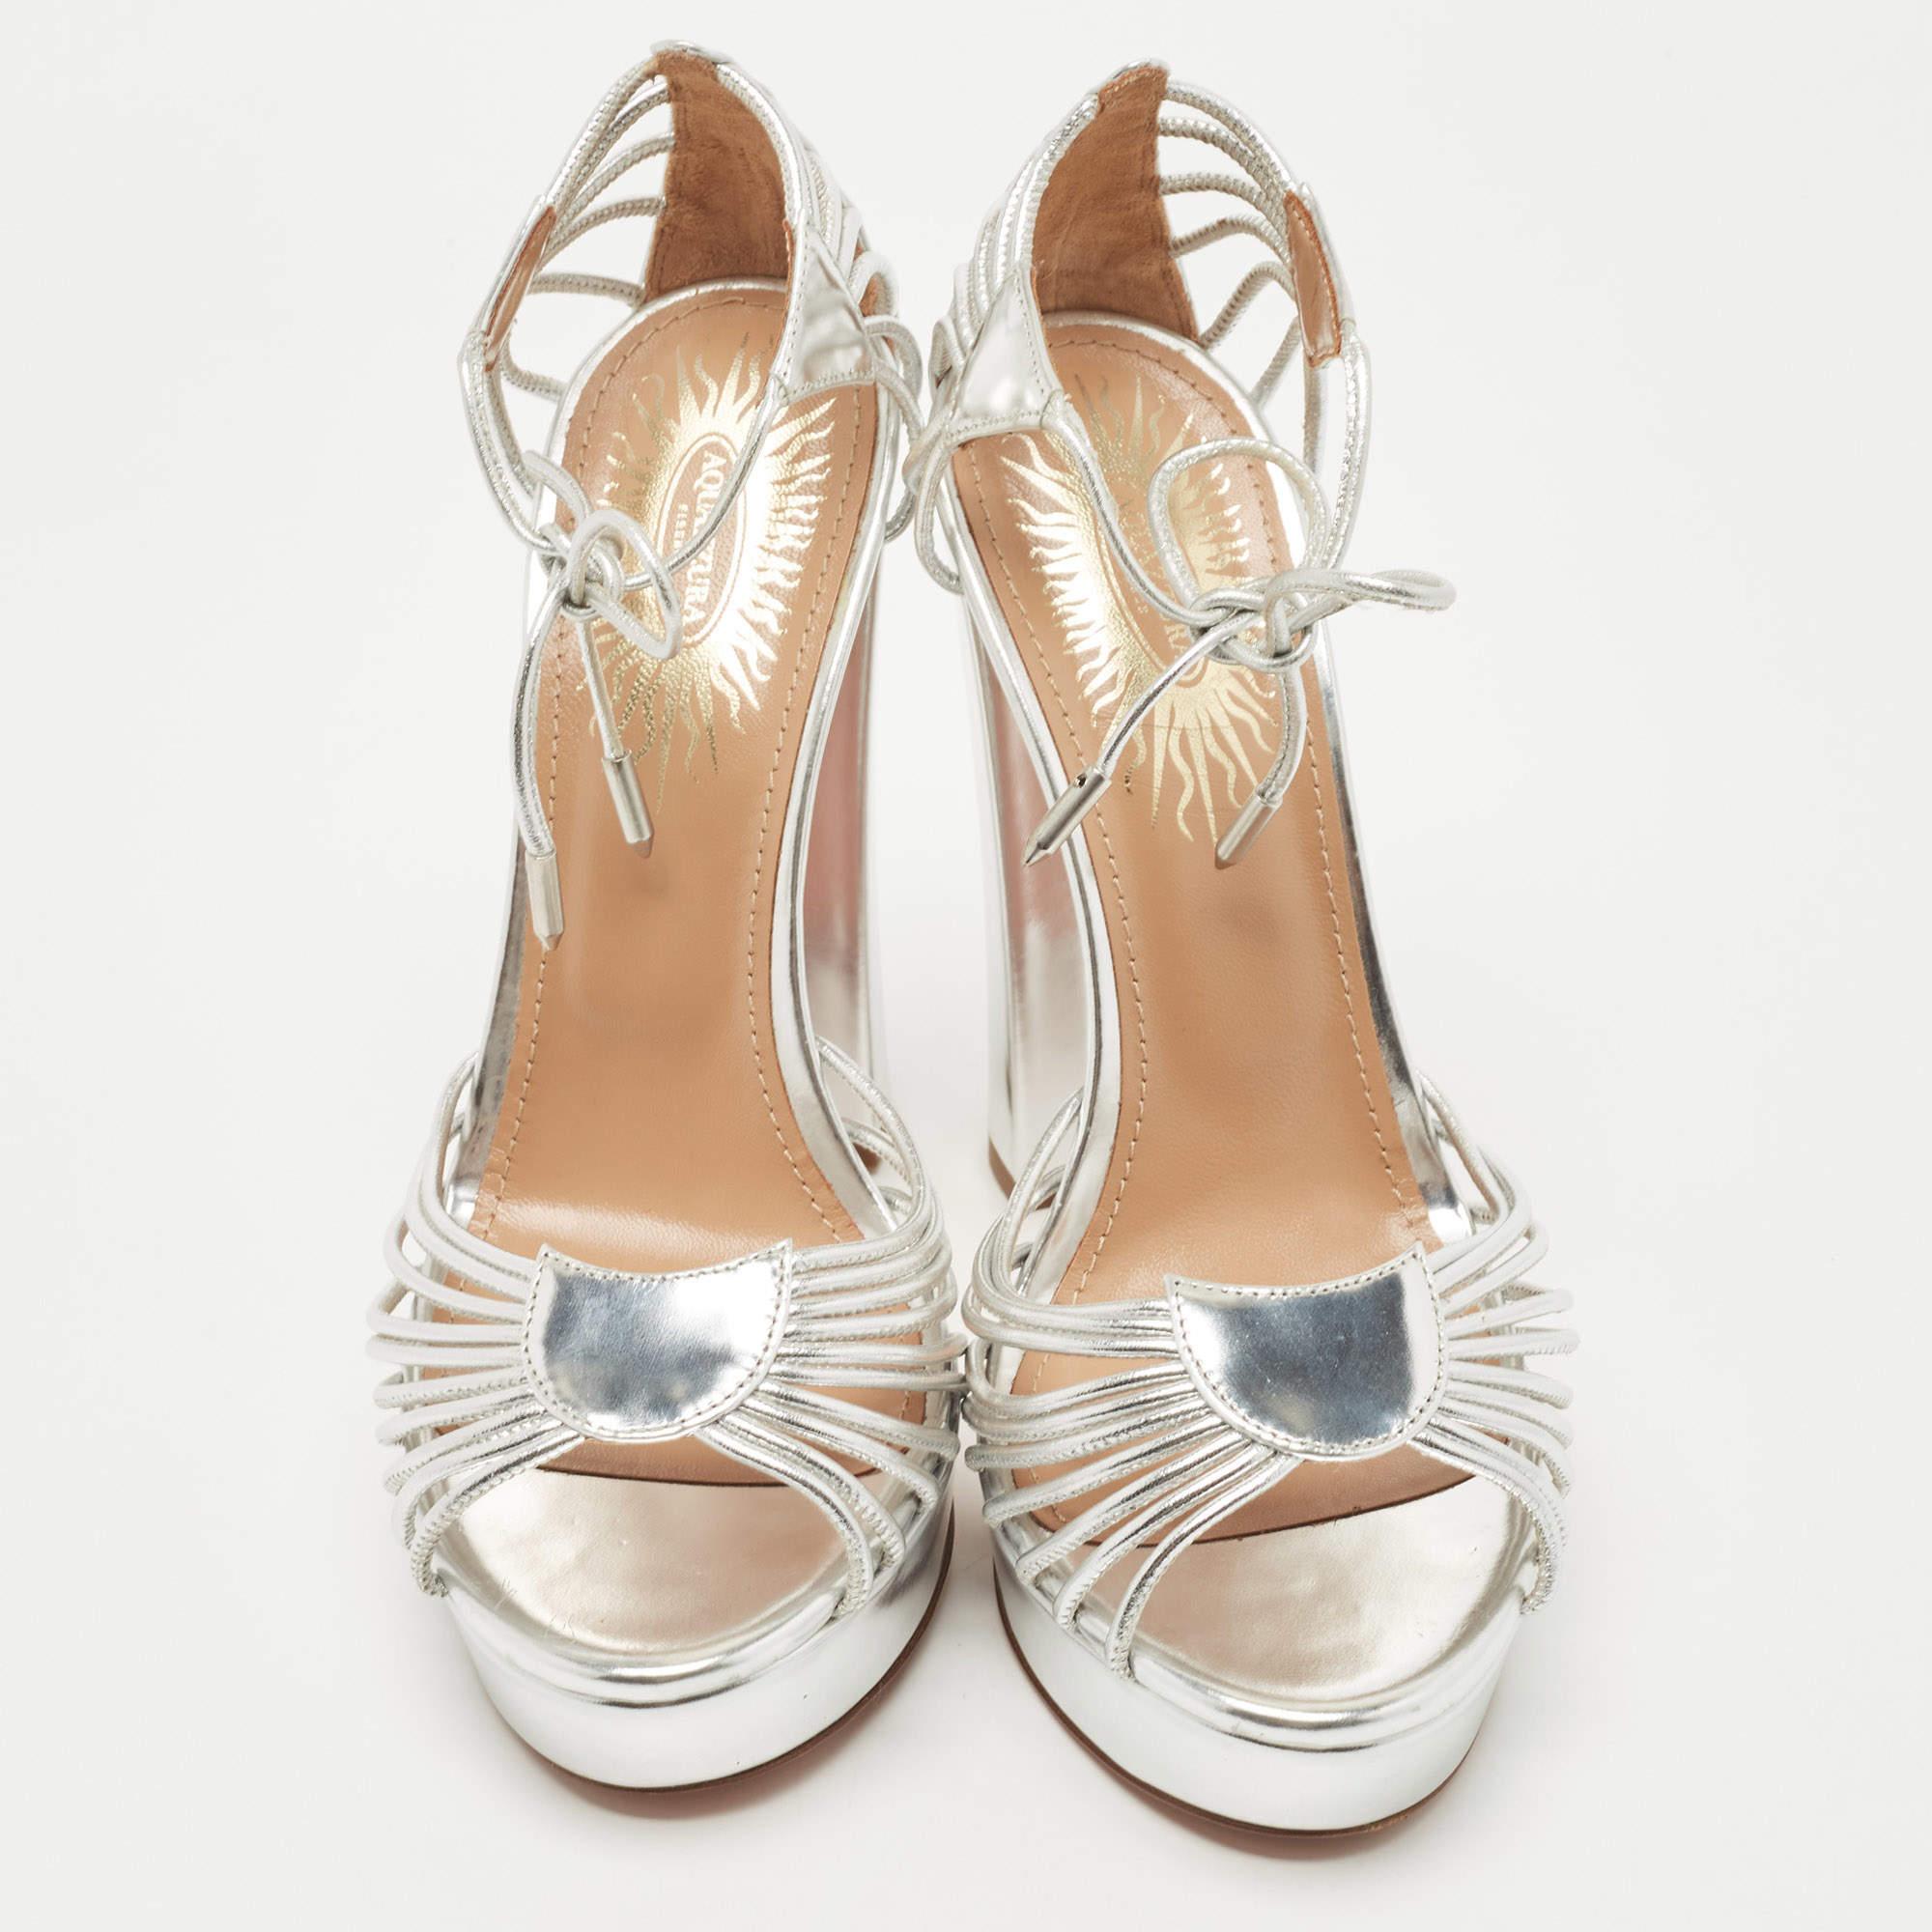 These heeled sandals are the perfect combination of style and comfort, with a sleek design that adds a touch of elegance to any outfit. The sturdy heel offers stability, while the soft straps ensure a comfortable fit. Ideal for many occasions, these